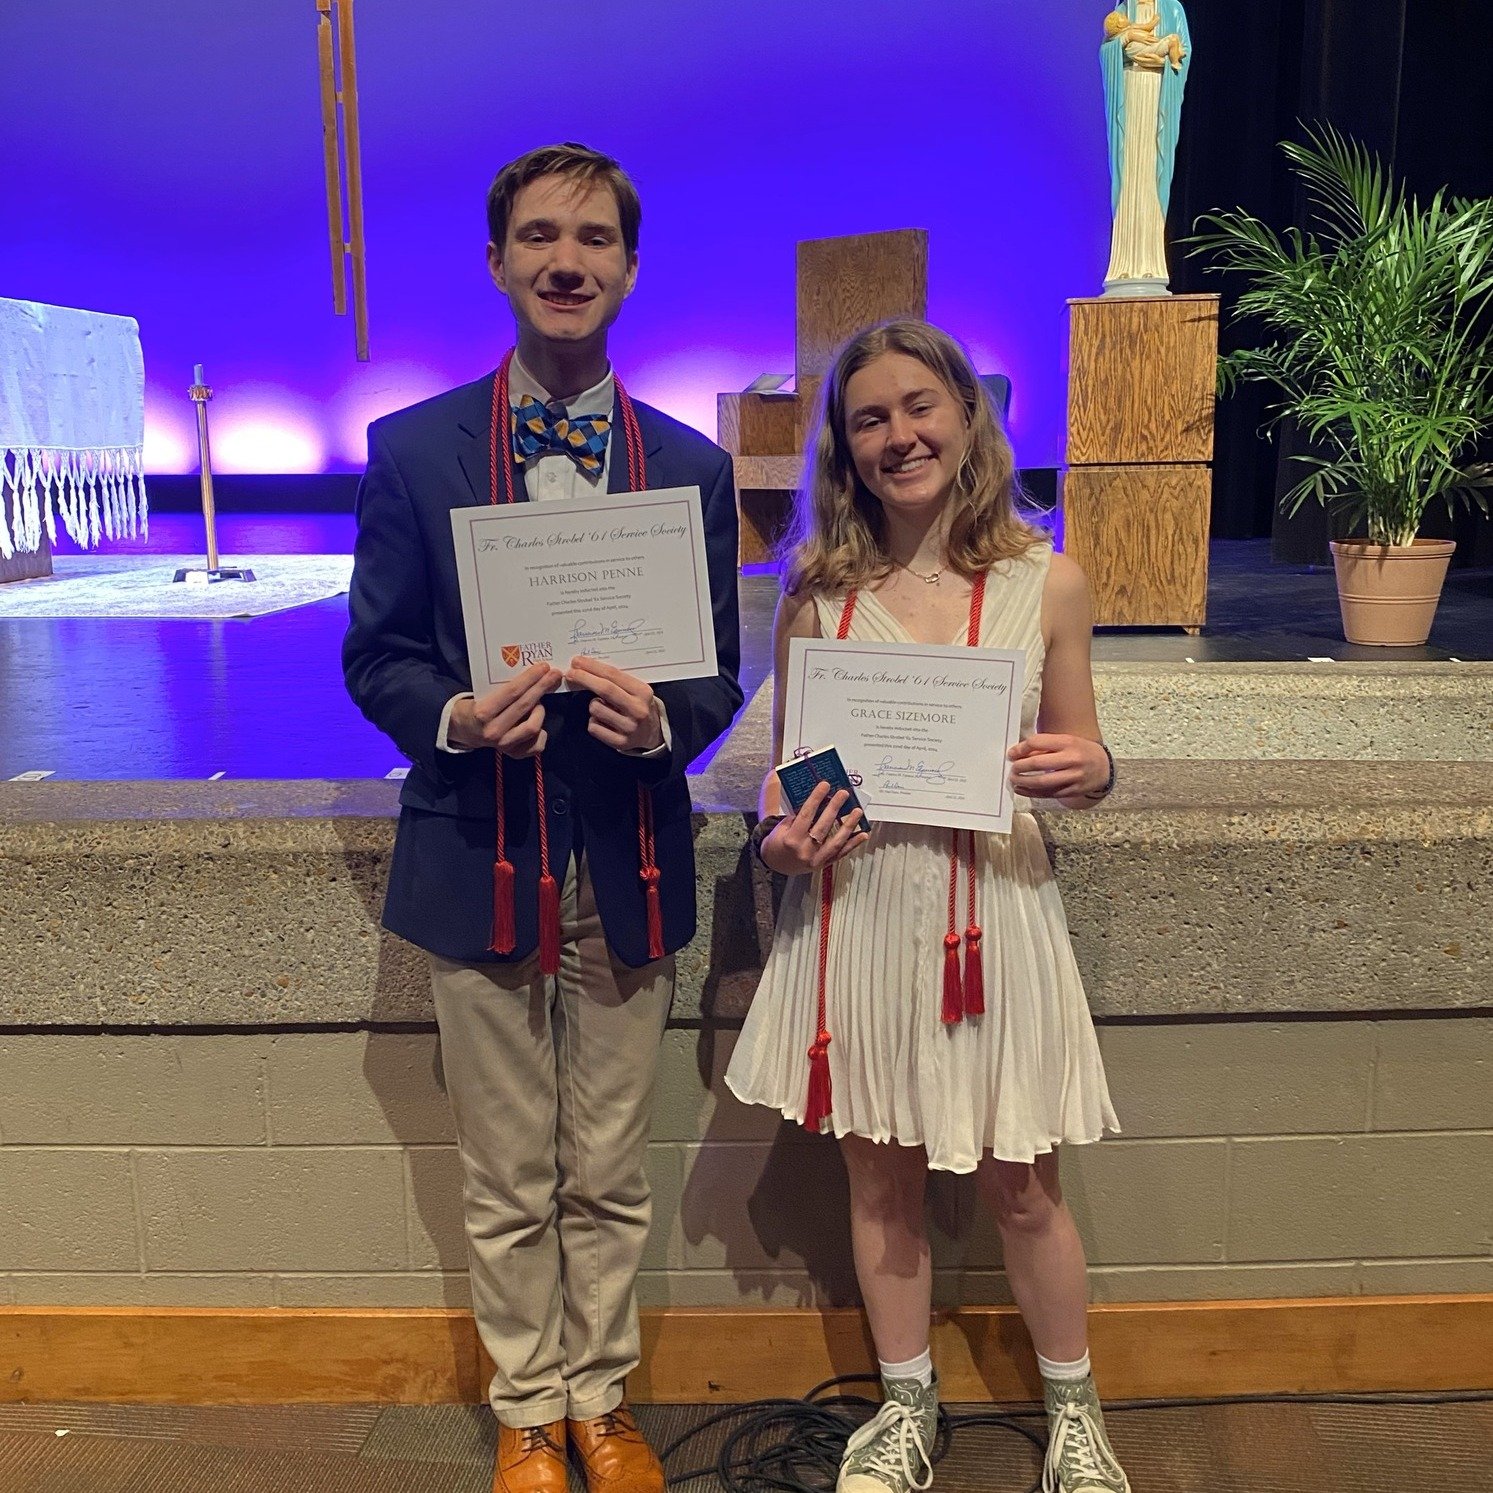 ALUMNI NEWS - Congratulations to Grace Sizemore and Harry Penne, both SHS alumni  Class of 2020, for their inductions into the Fr. Strobel Service Honors Society. This awards students who have served at least 120 hours in their community through the 